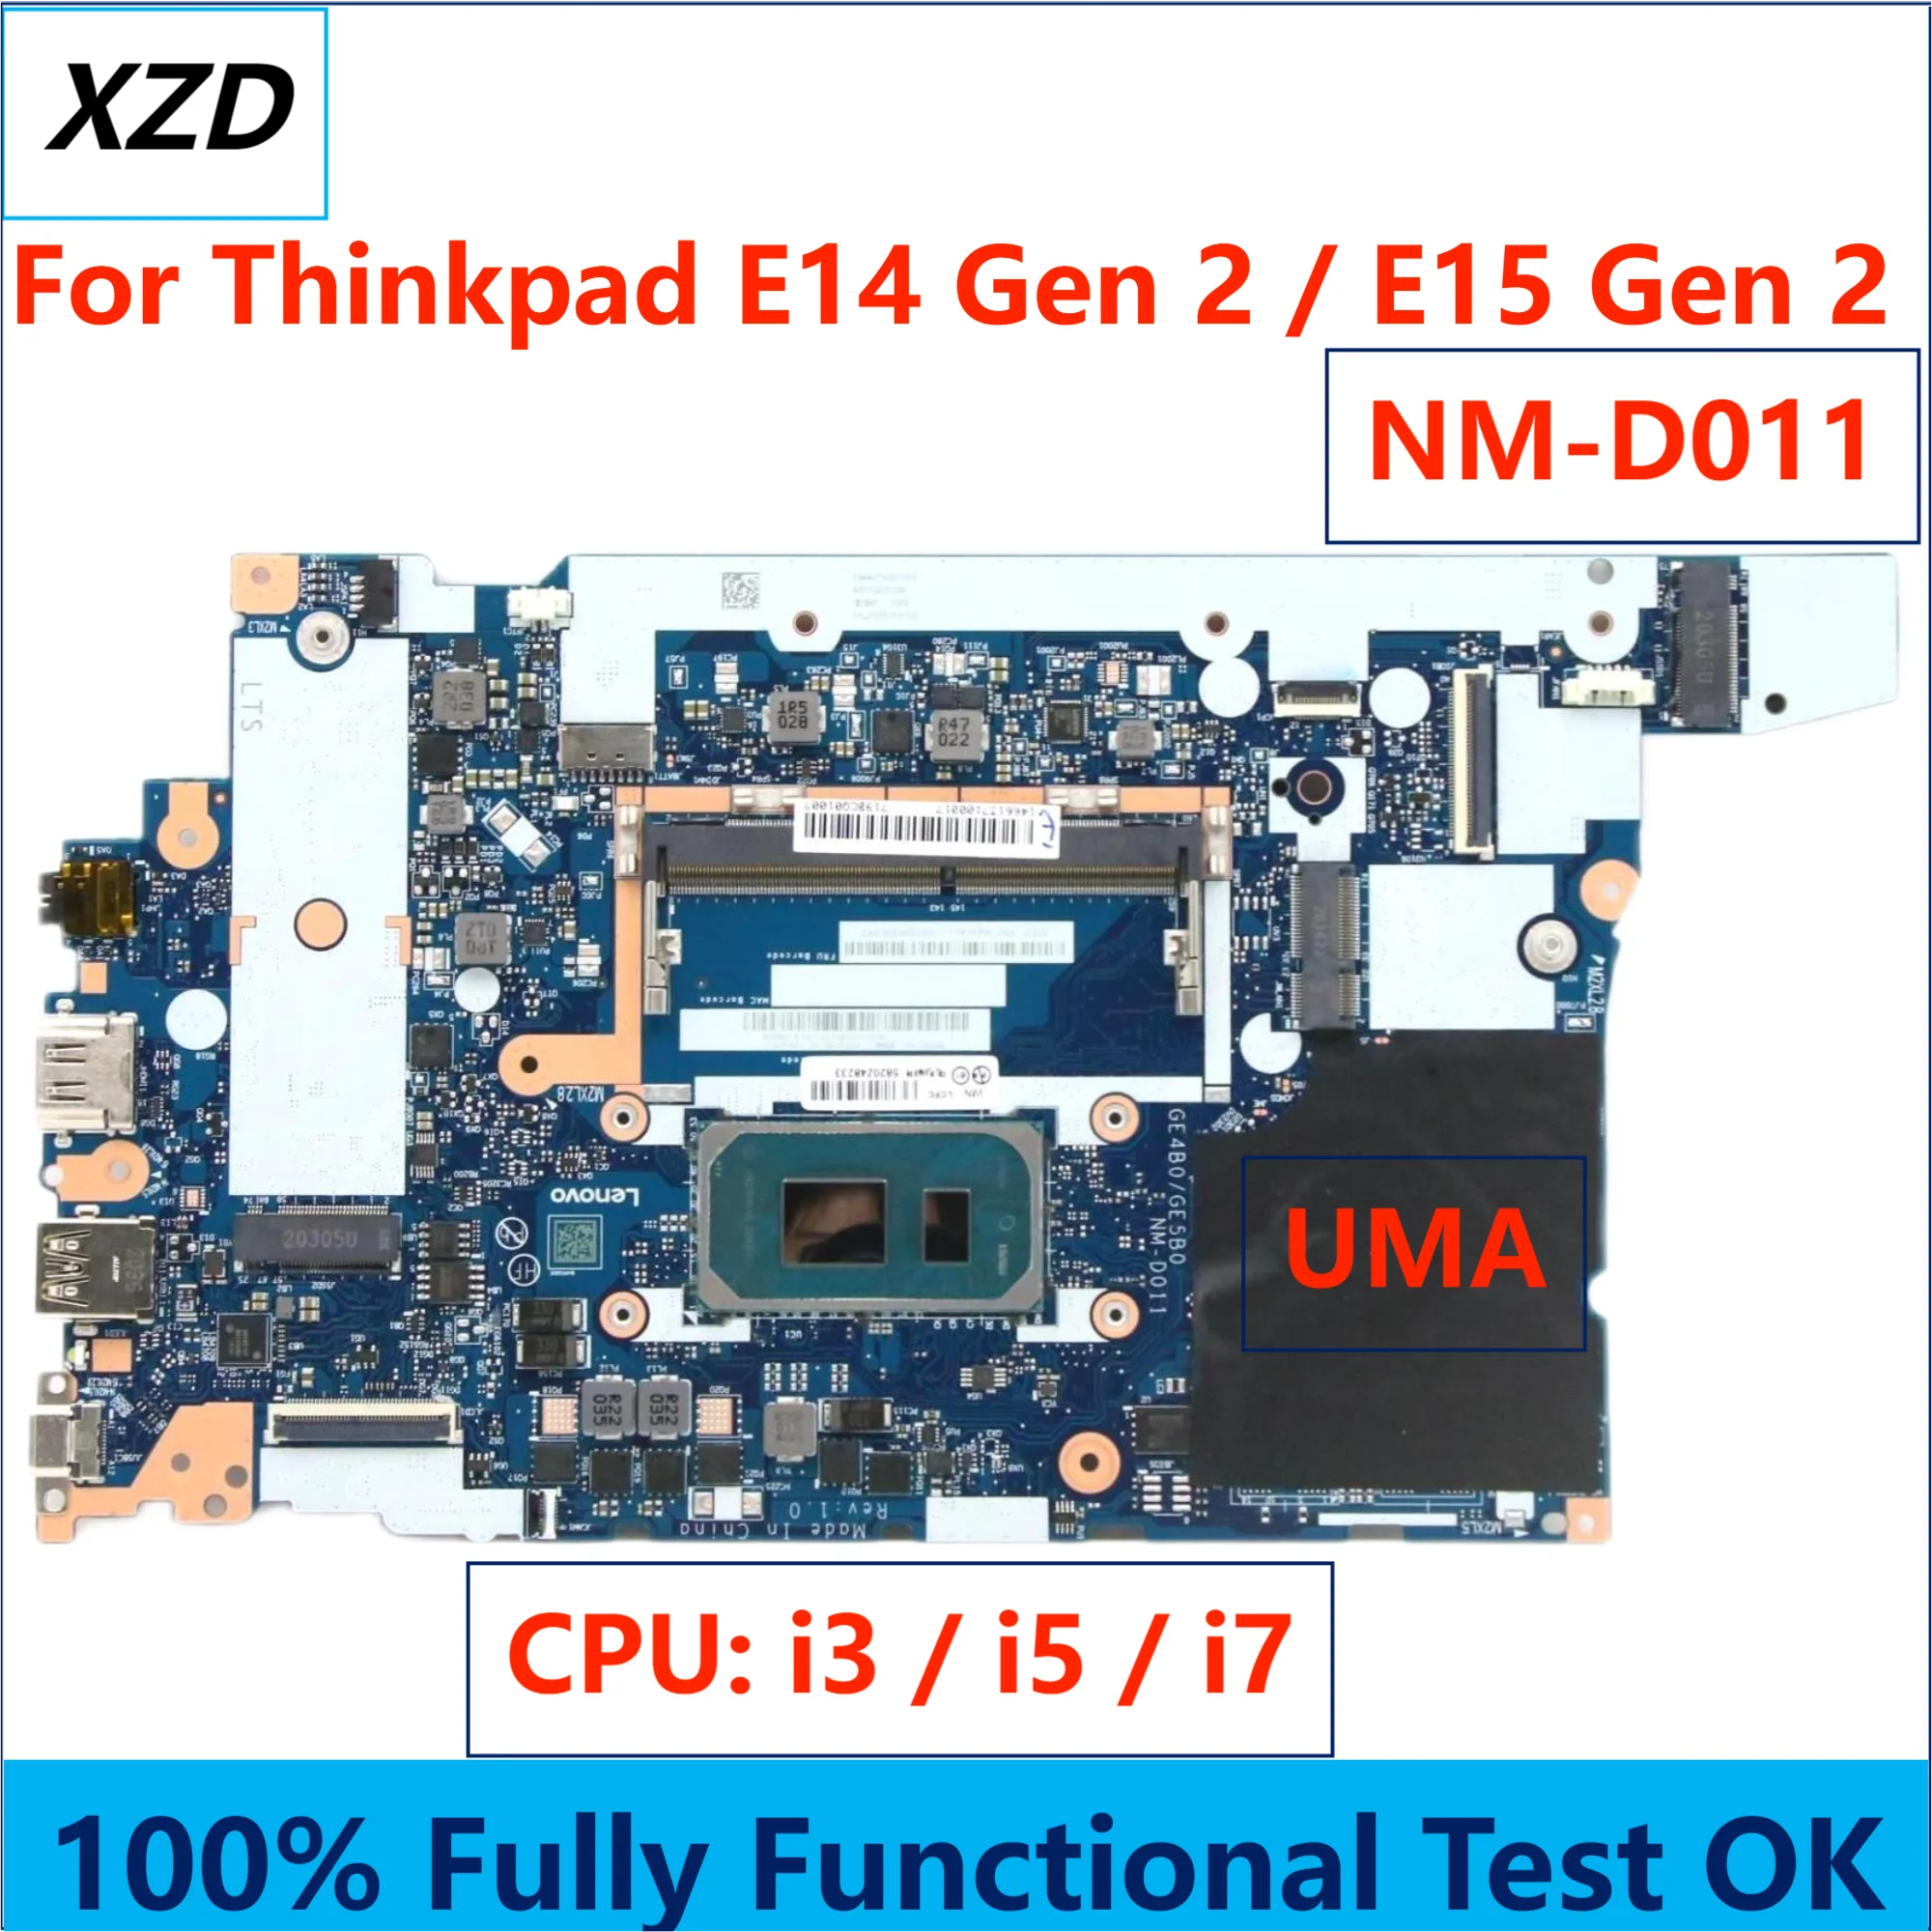 

NM-D011 Mainboard For Lenovo ThinkPad E14 Gen 2 E15 Gen 2 Laptop Motherboard with i3-1115g4 i5-1135g7 i7-1165g7 CPU 100% test ok